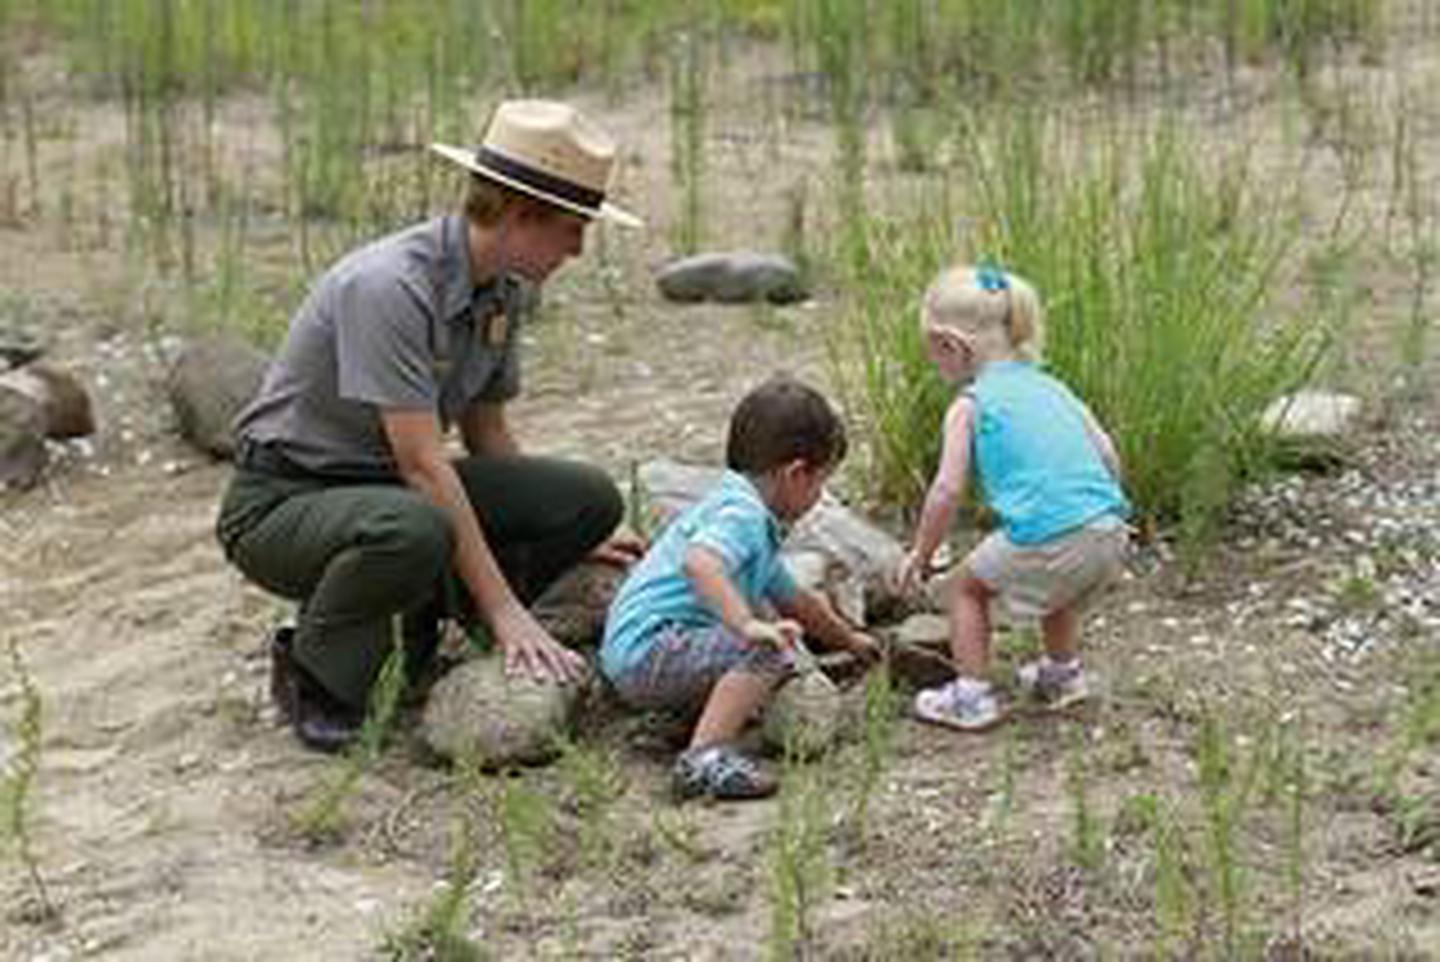 Park ranger with kids in the nature play area at the Paul H Douglas Center area in the Indiana Dunes National Park.